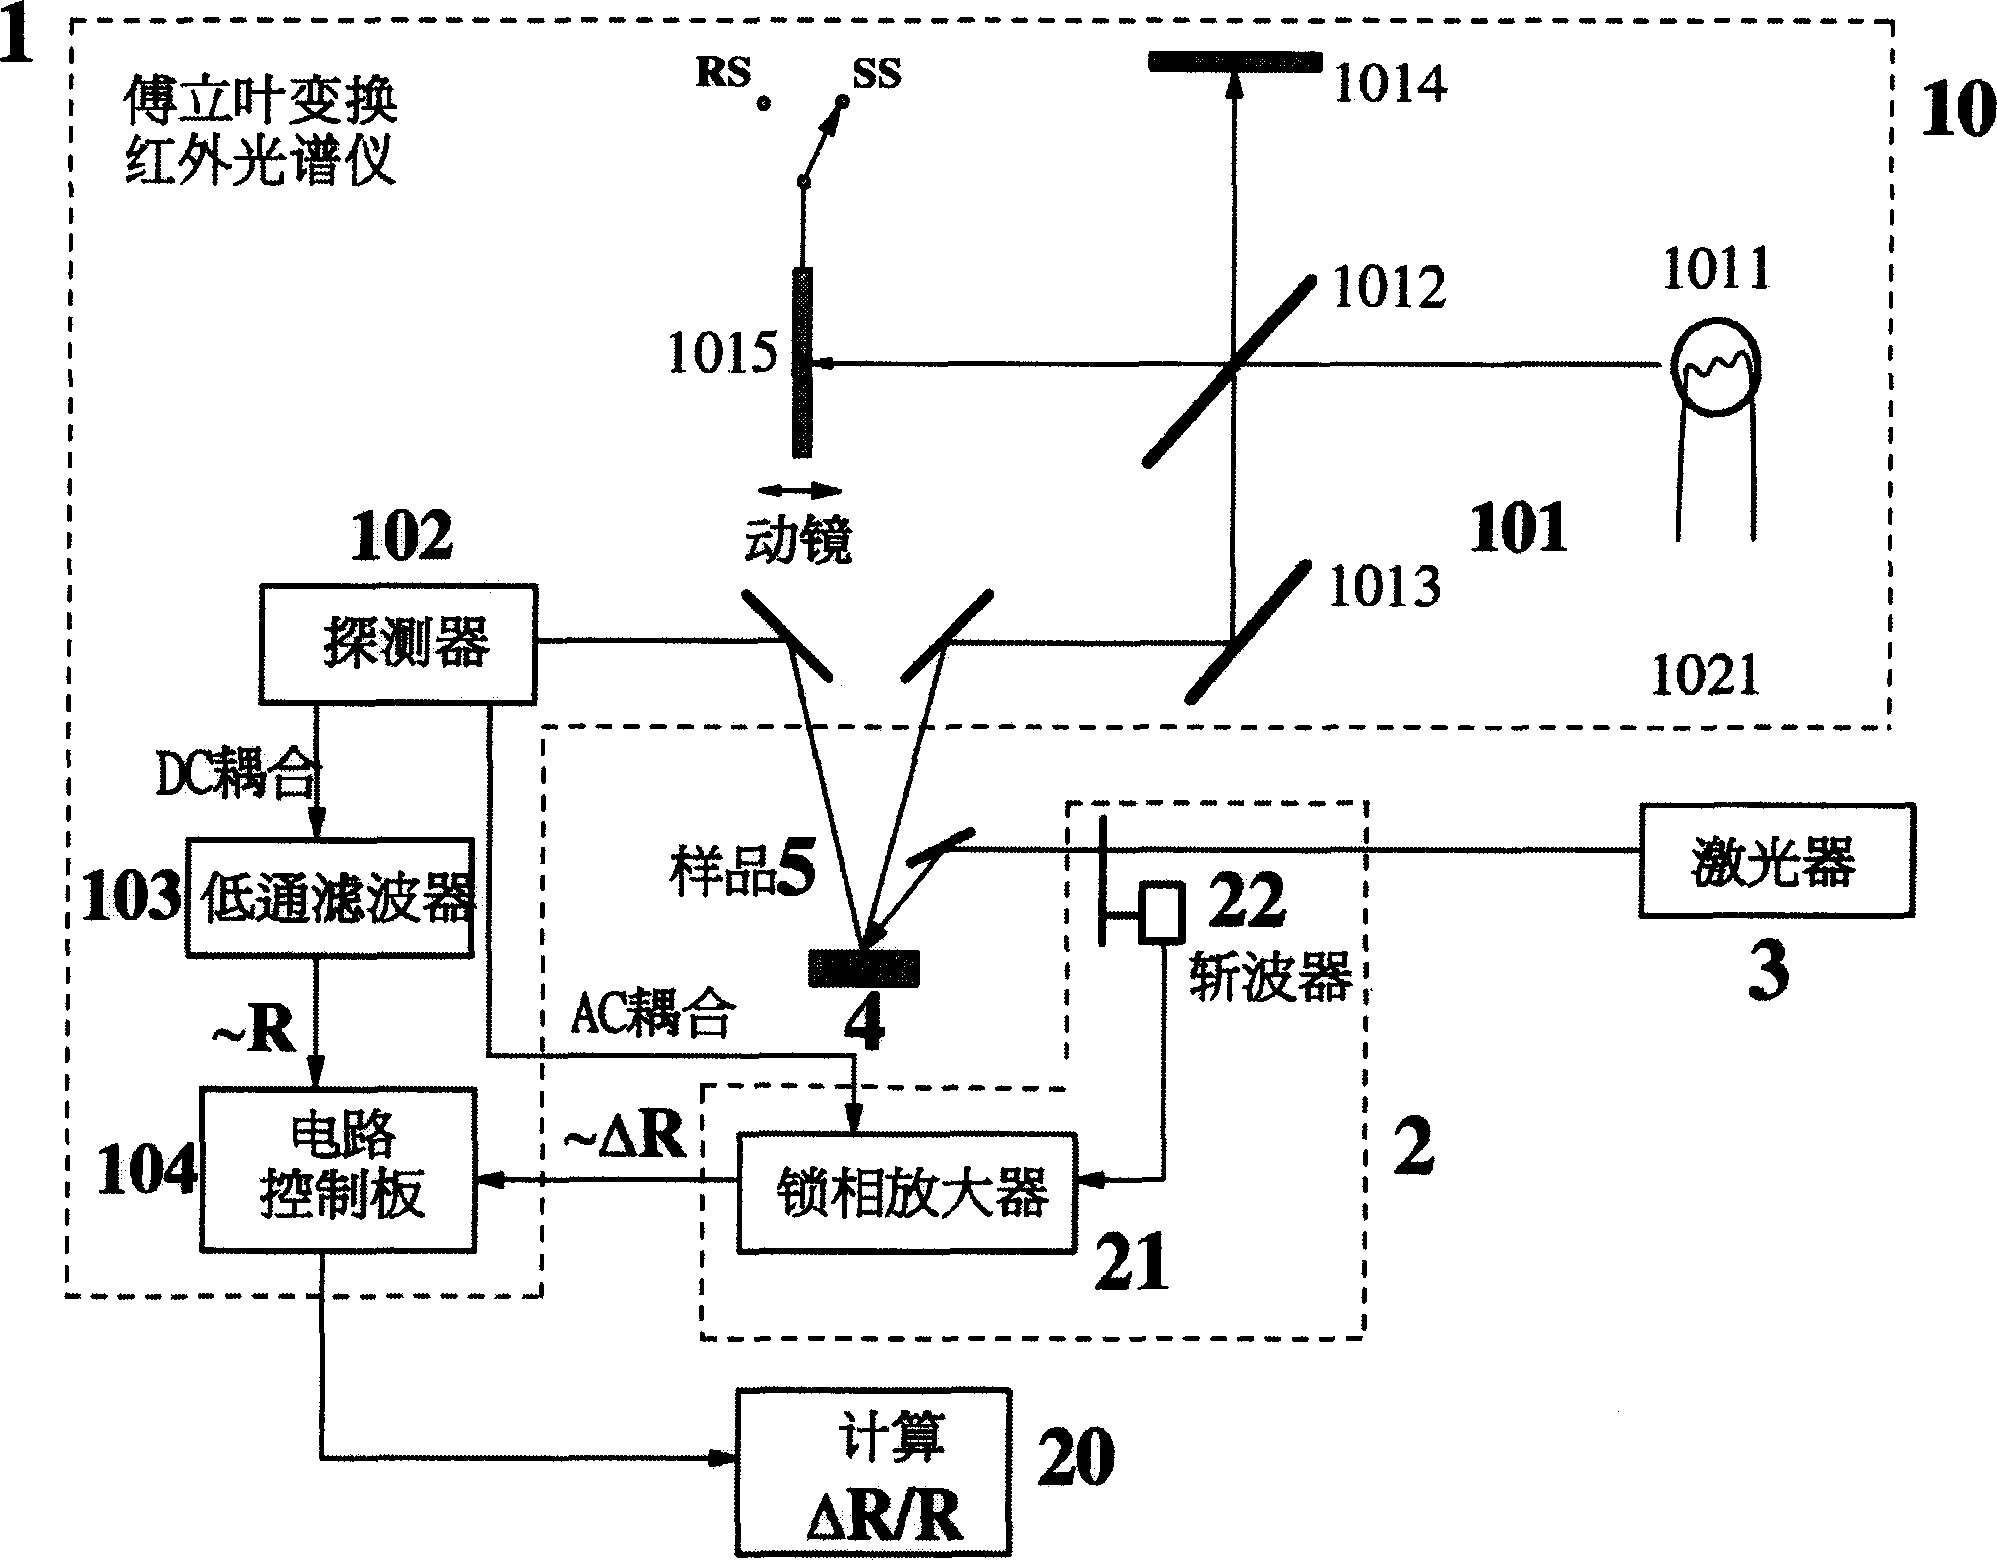 Photo-modulated reflectance spectrum measuring method and apparatus based on step scan